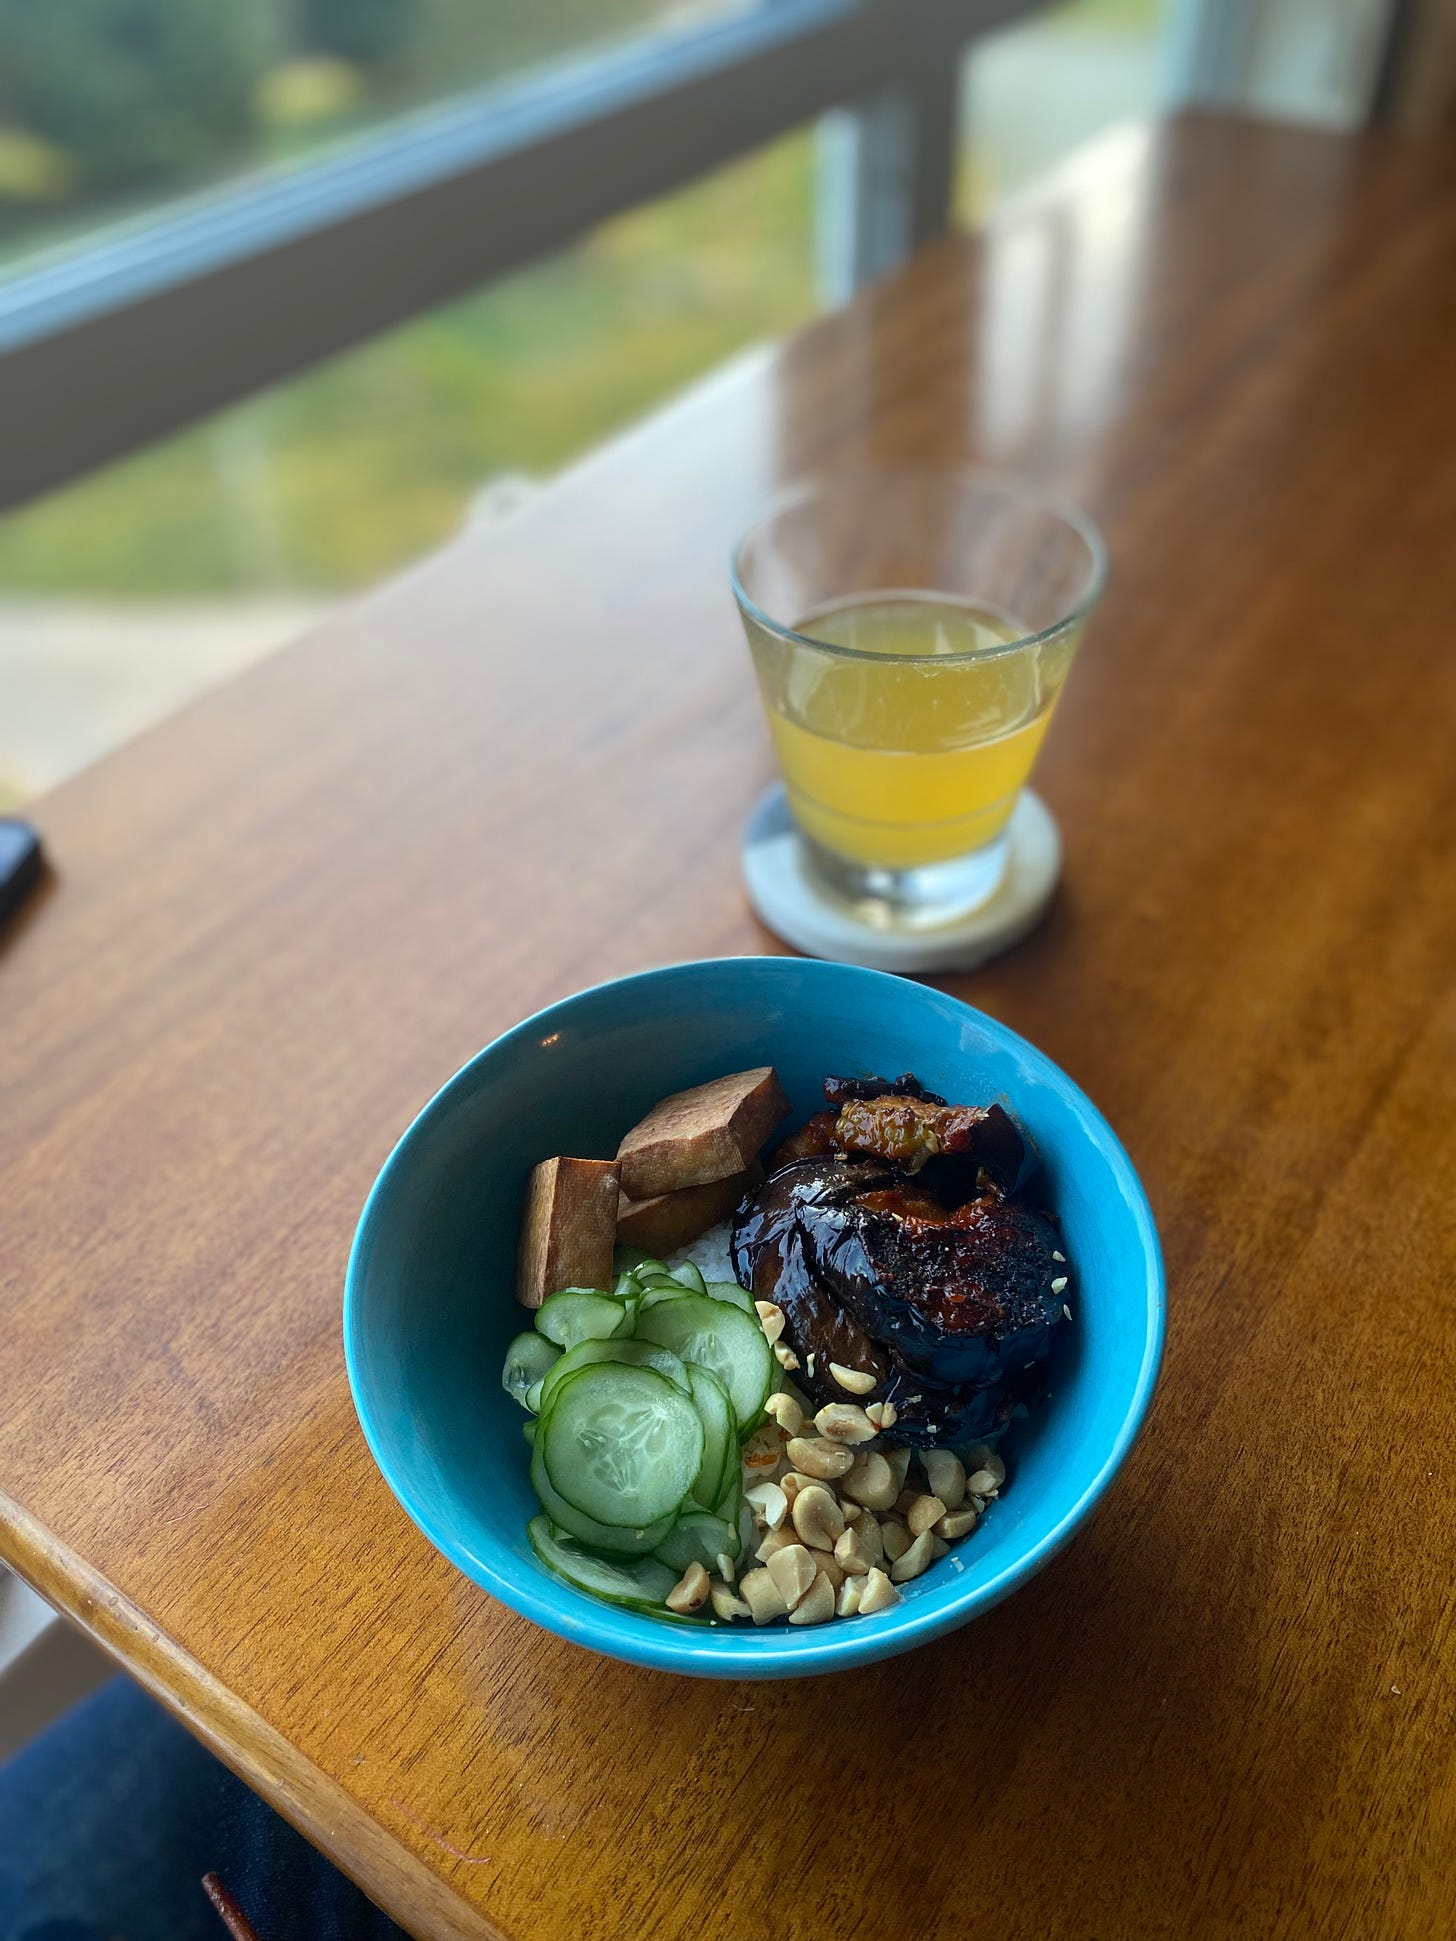 A blue bowl of rice topped with gochujang-glazed eggplant, peanuts, tofu, and quick-pickled cucumber. On a coaster is a glass of light-coloured beer.